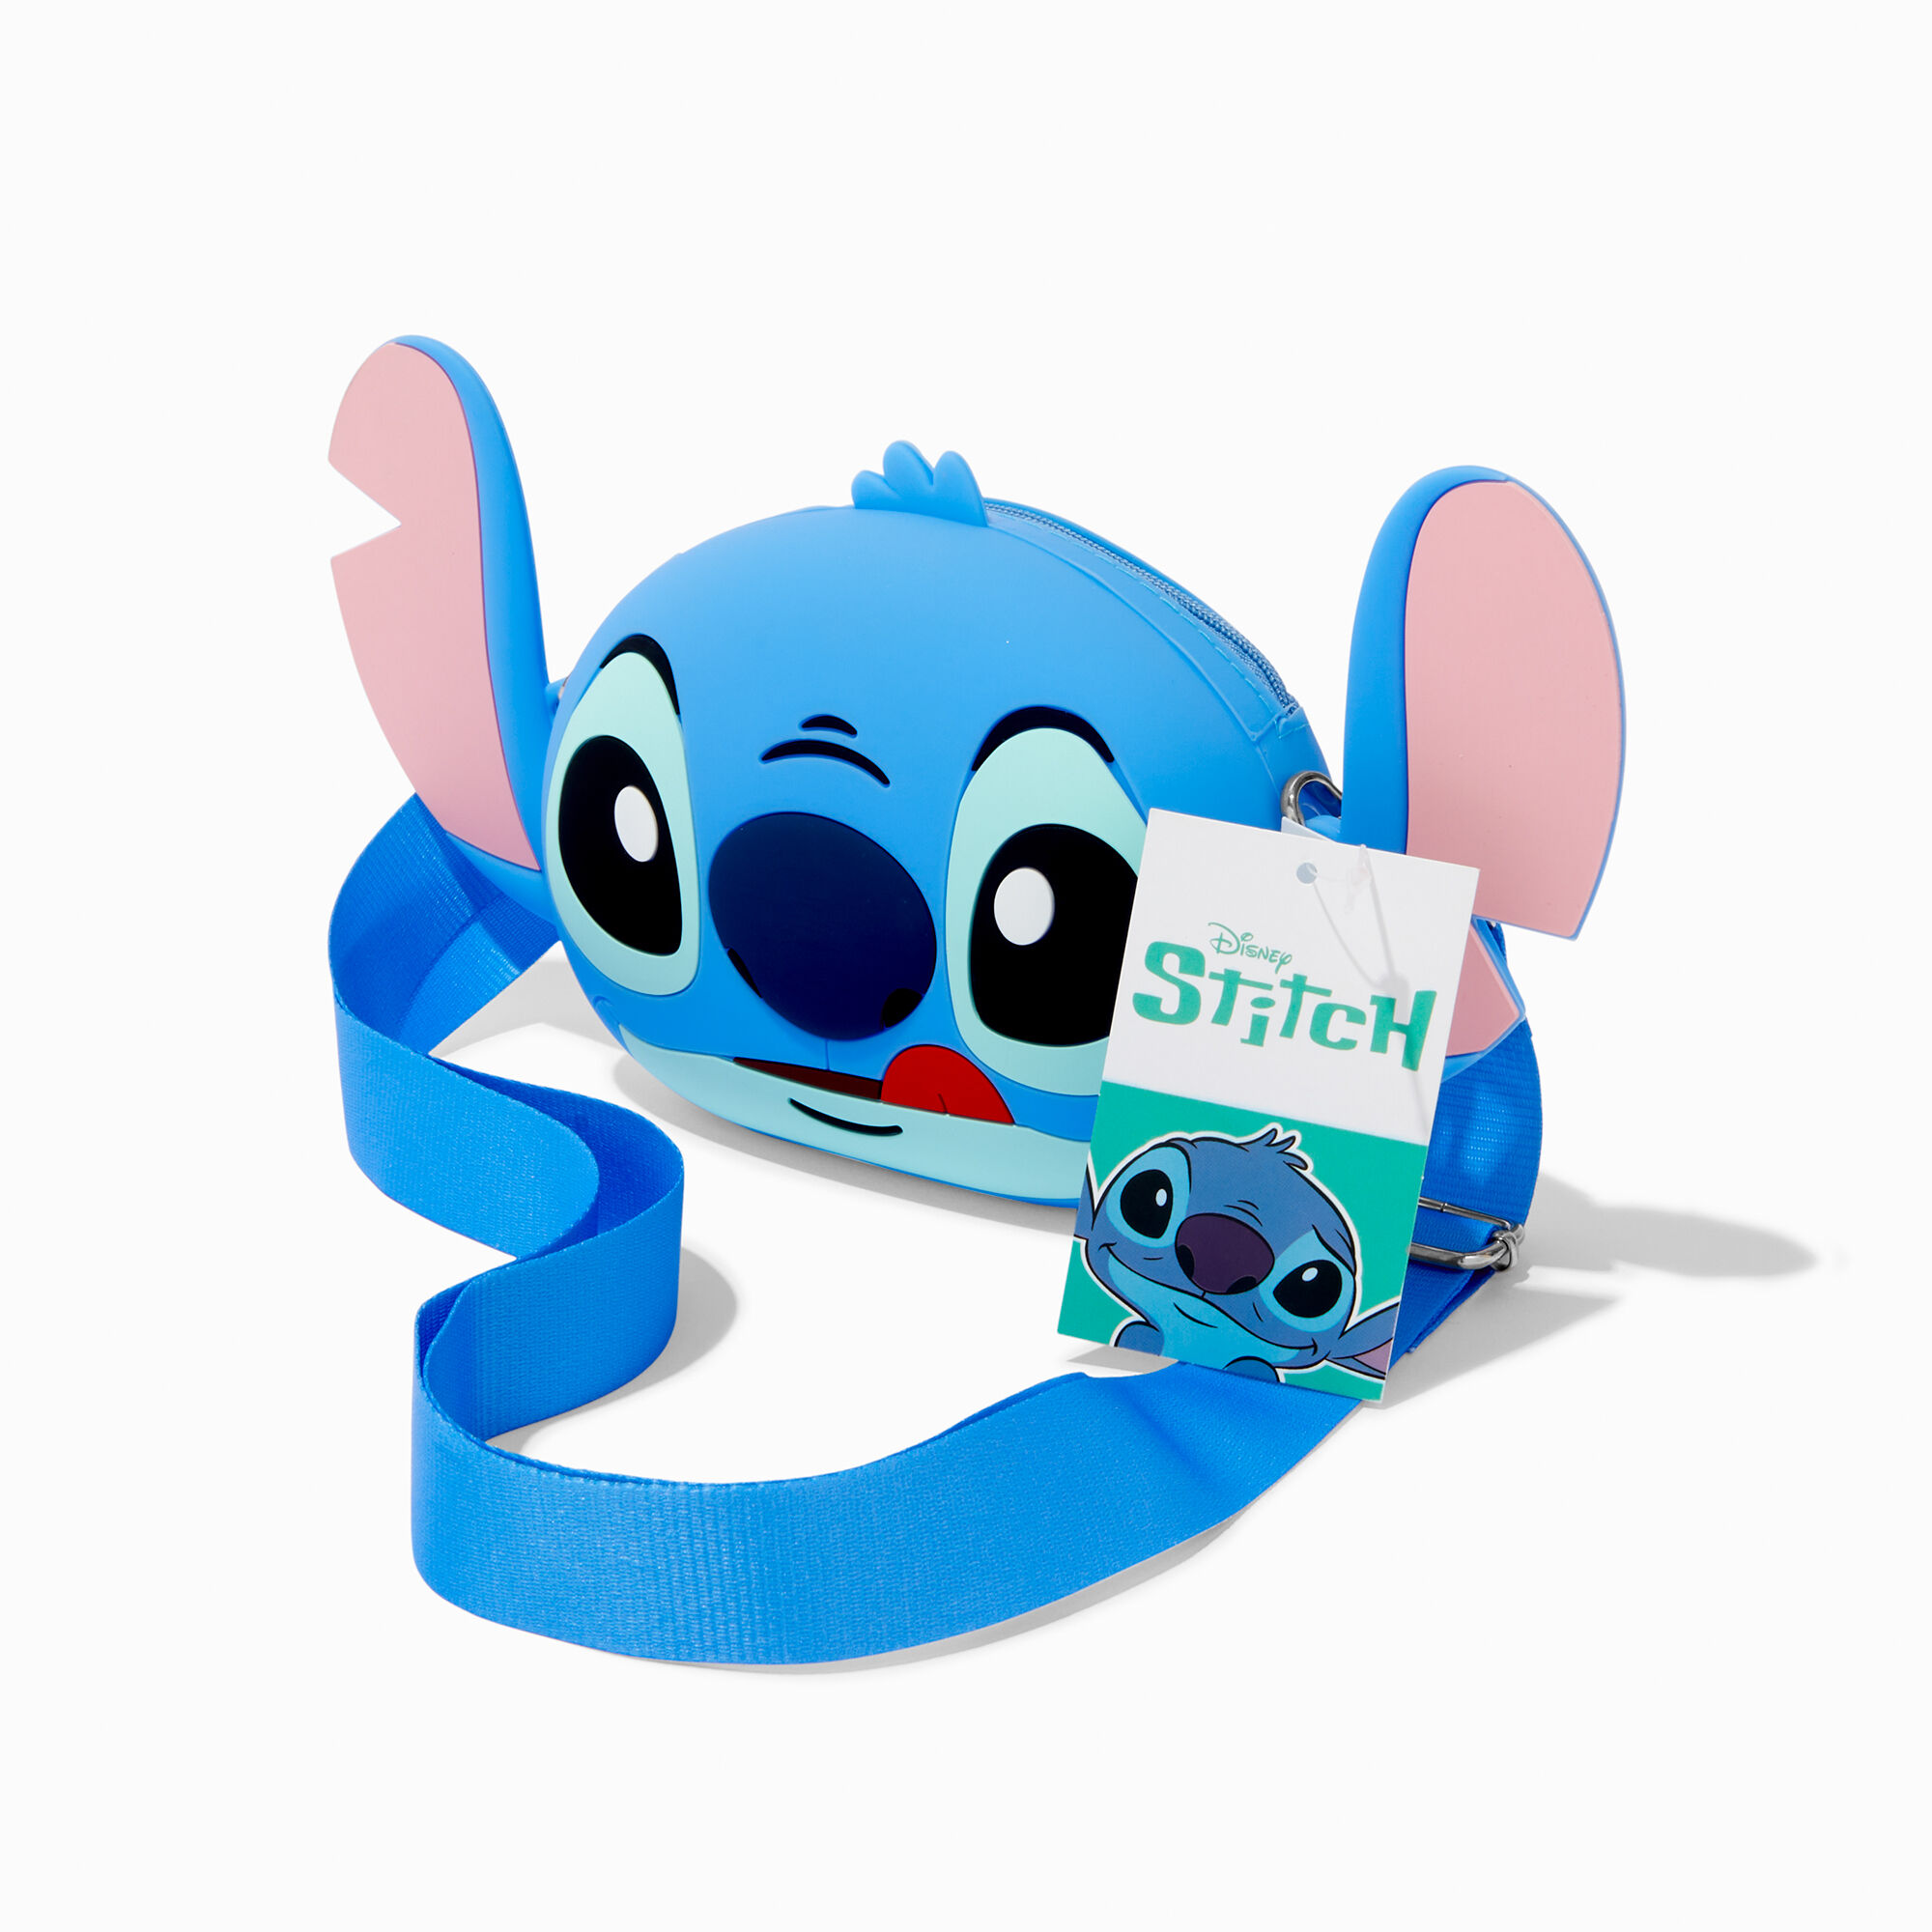 View Claires Disney Stitch Silicone Crossbody Bag information